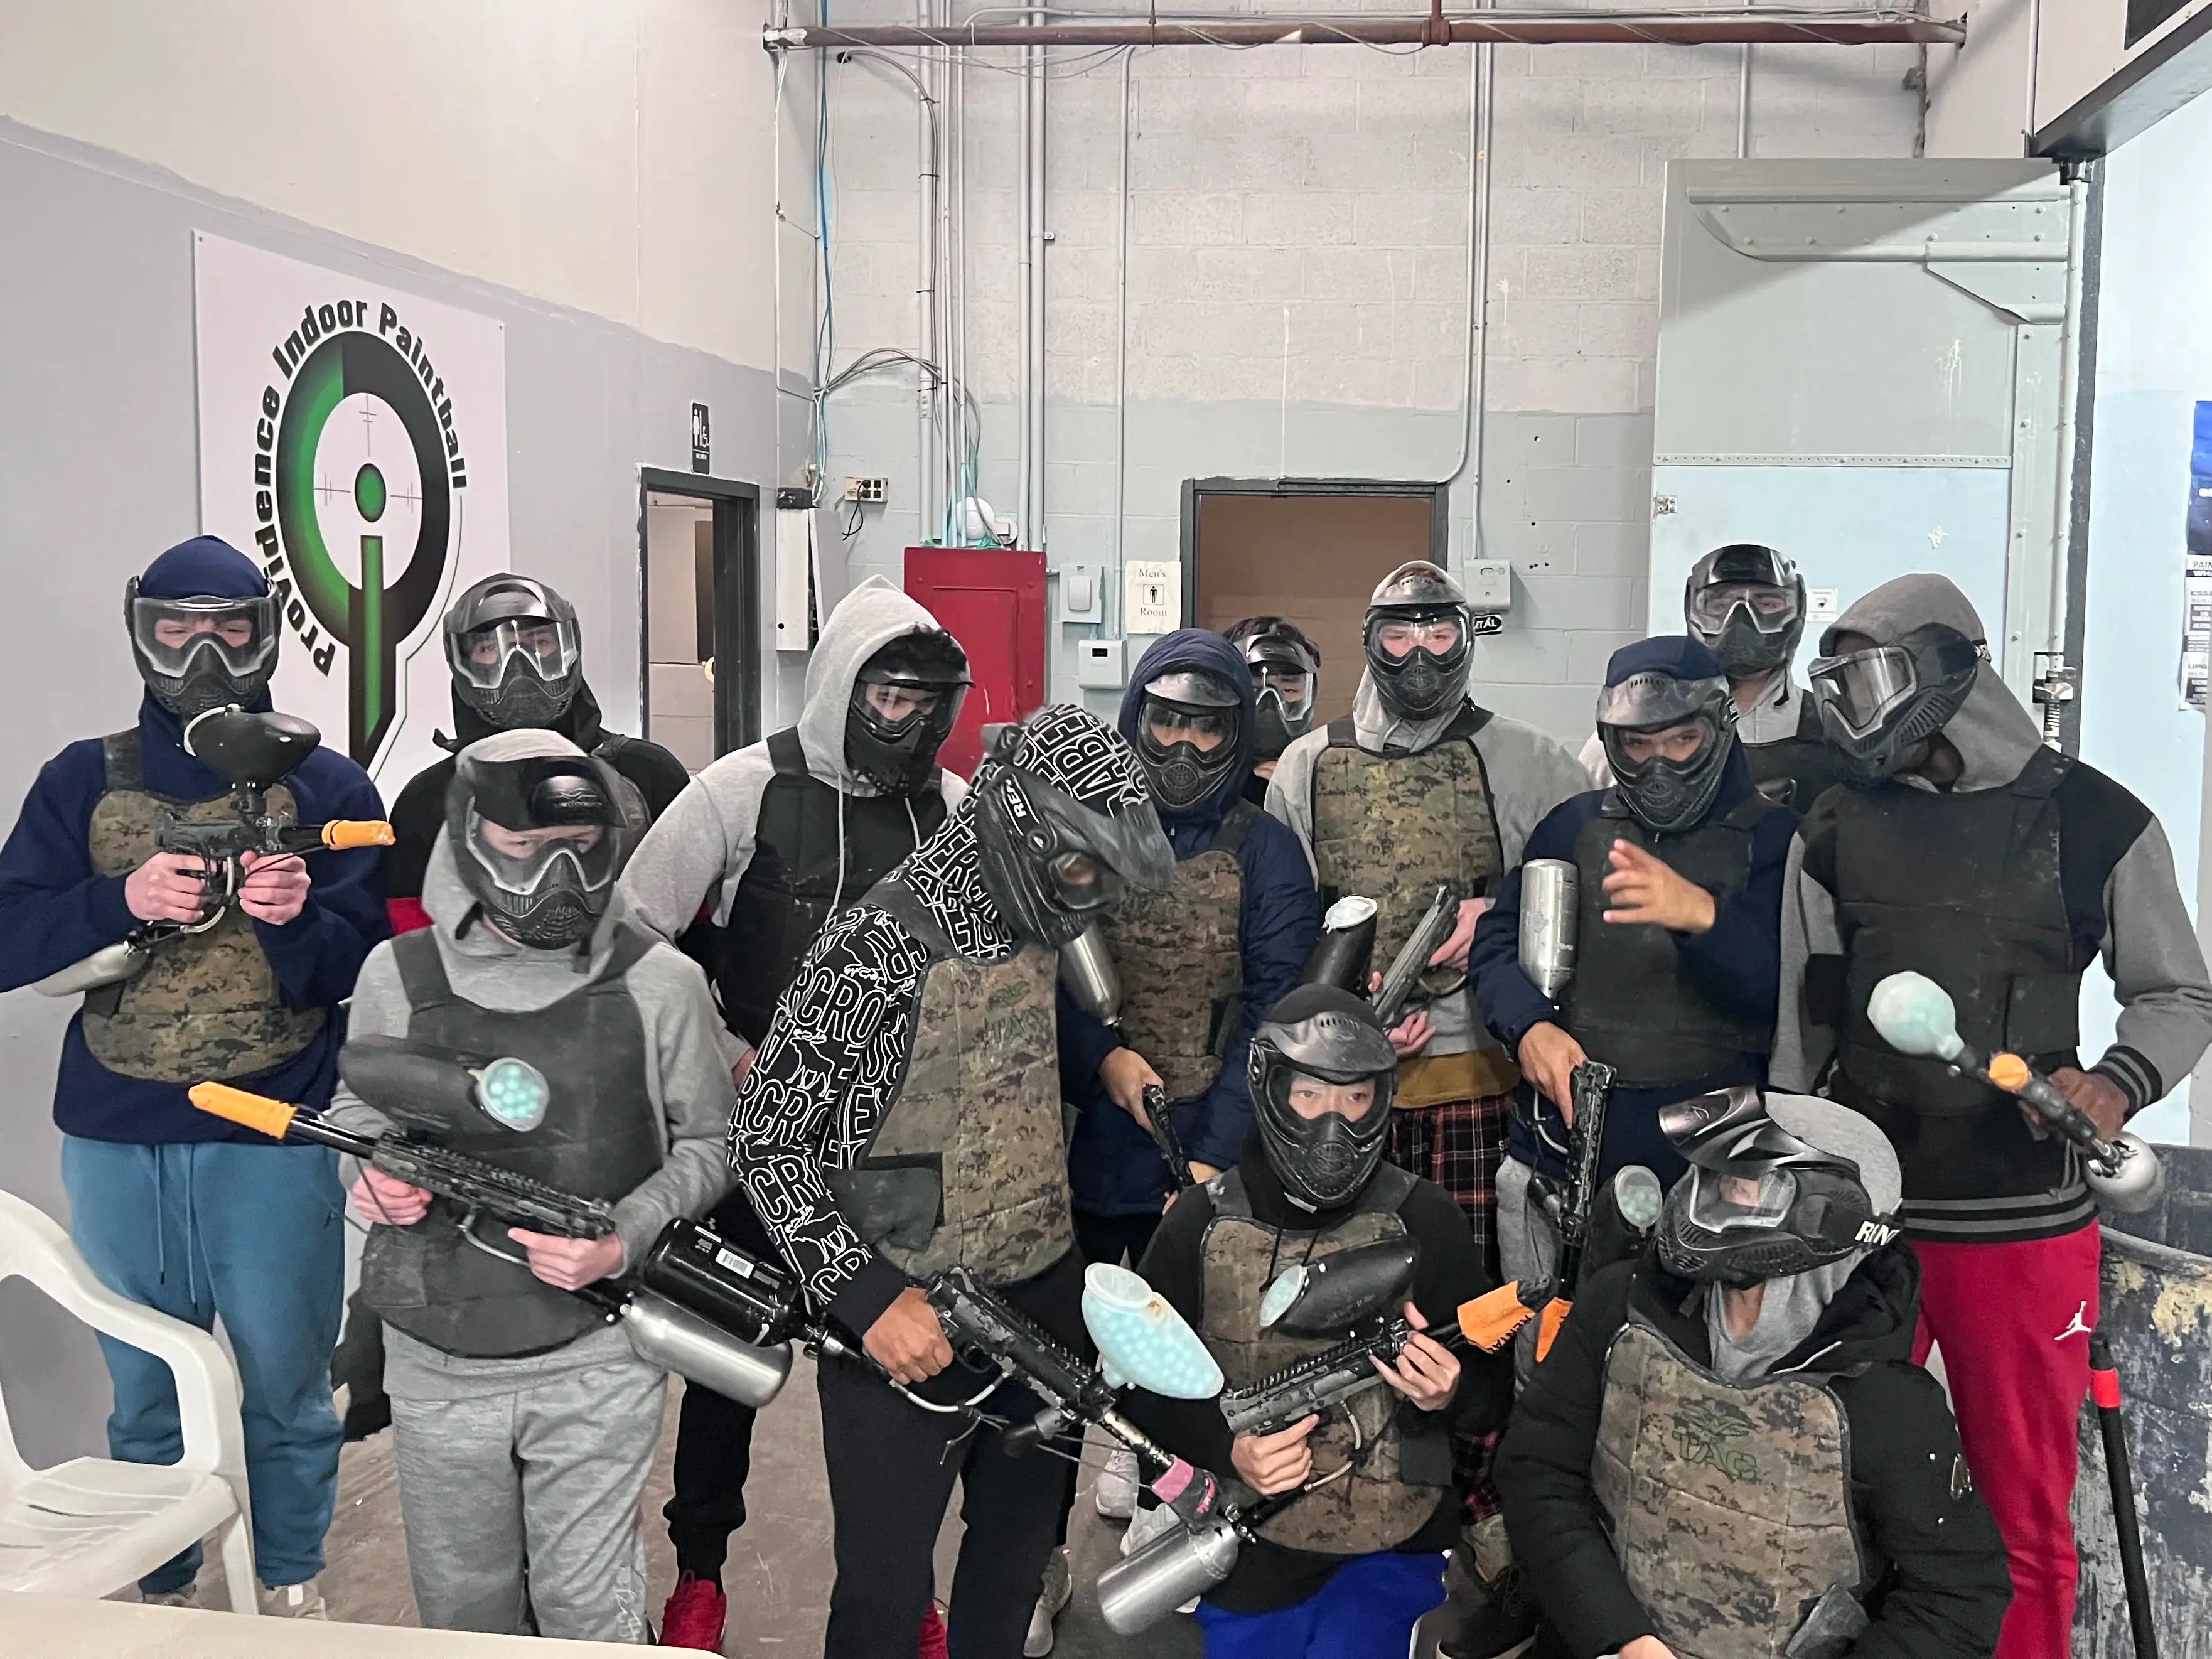 Paintball on weekends